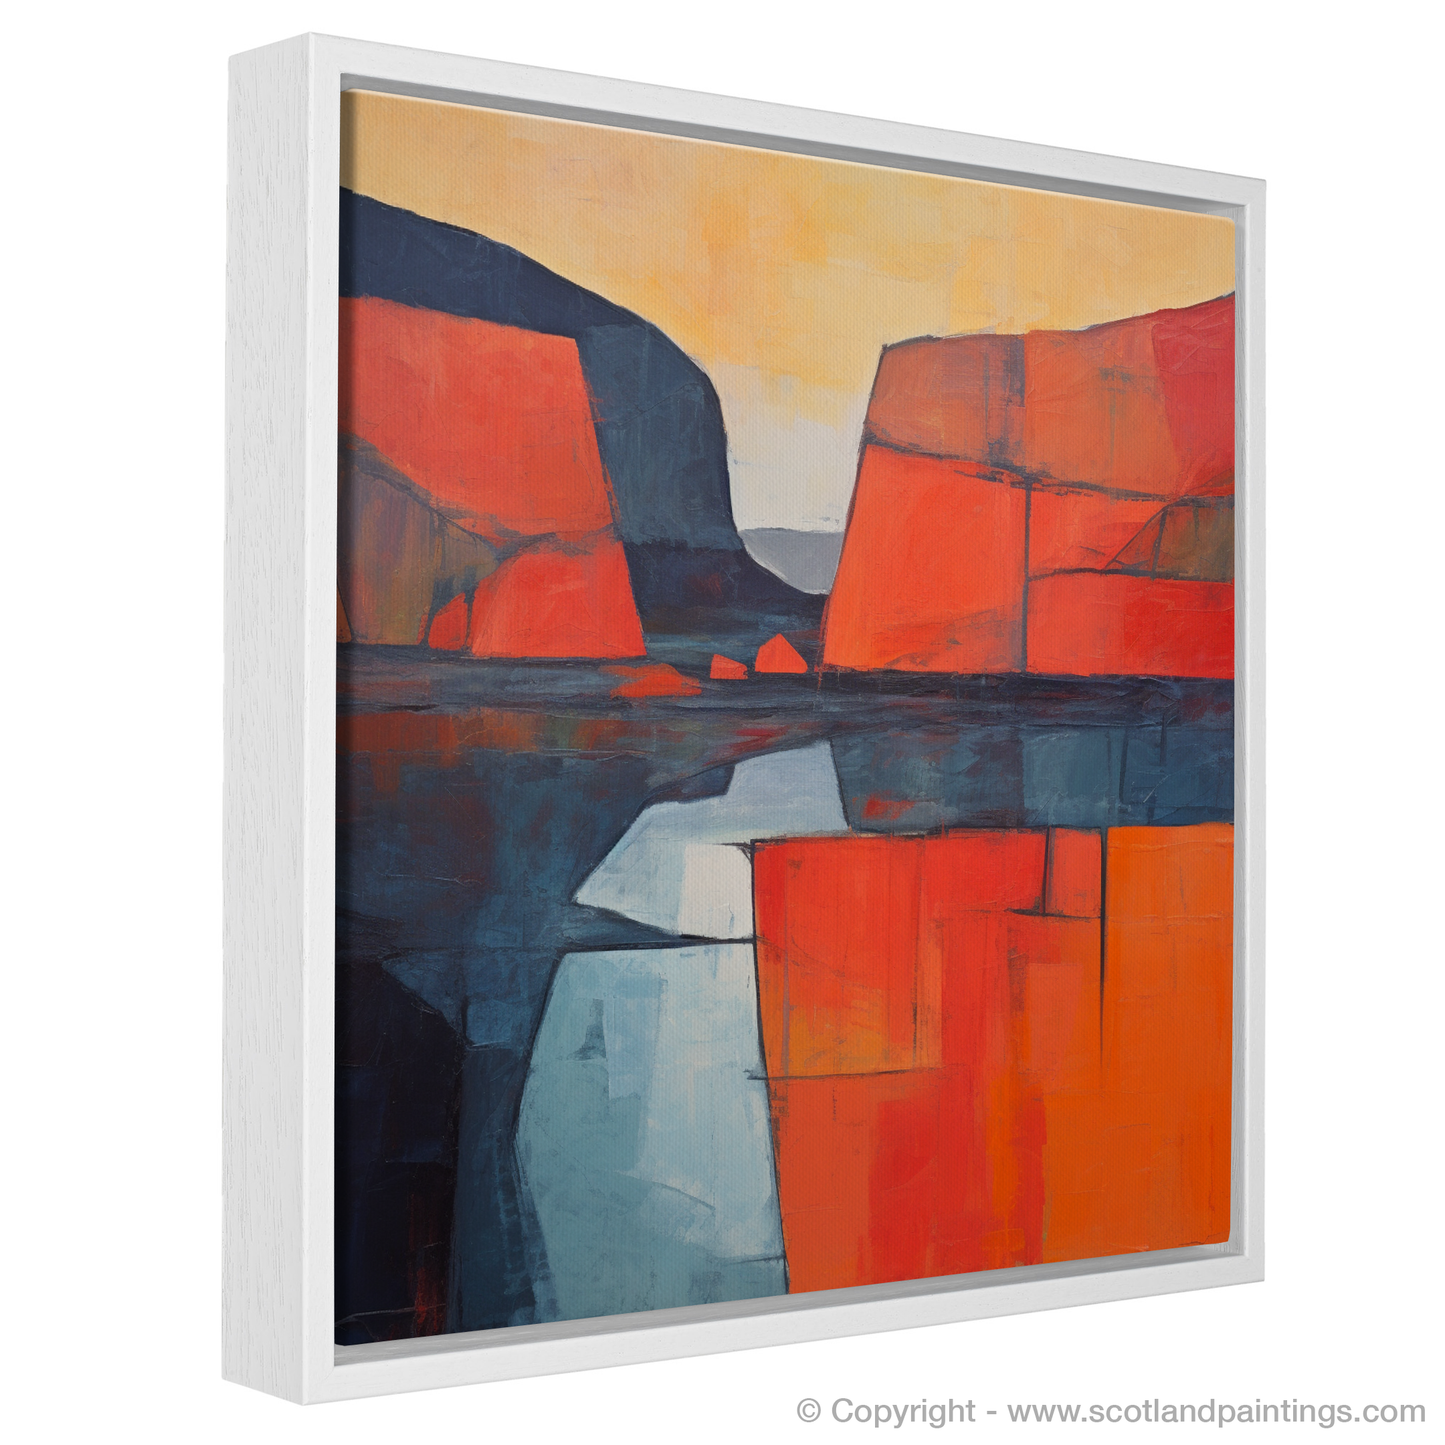 Painting and Art Print of A loch in Scotland entitled "Abstract Essence of Scotland's Loch".